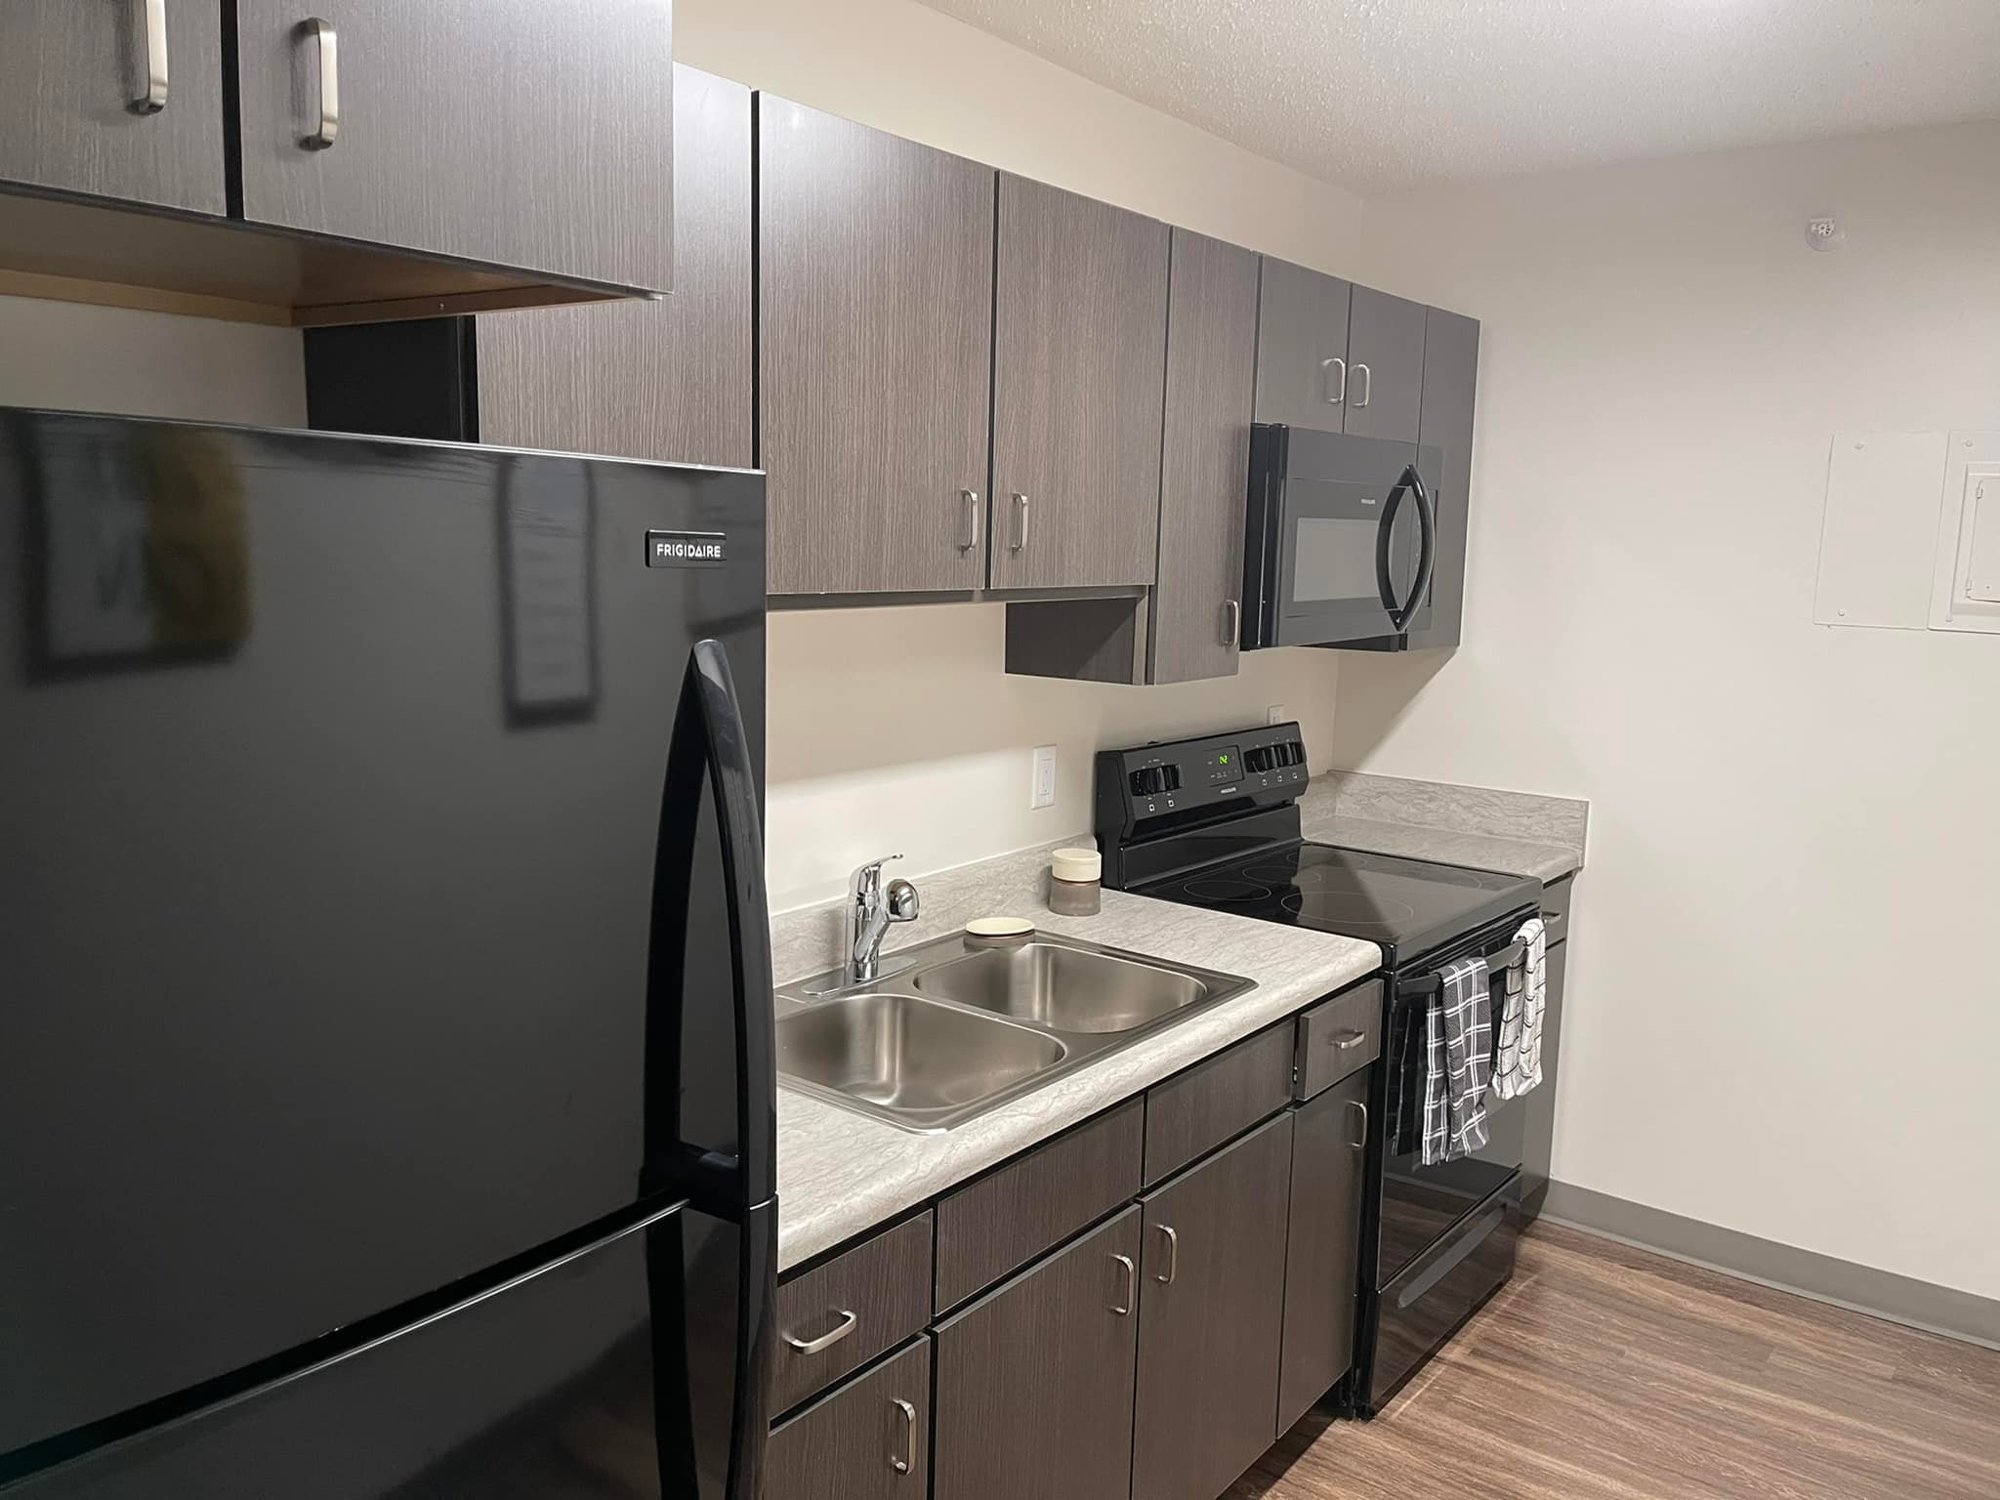 The kitchens in the 208 apartments at Centennial Towers were renovated with new cabinets and appliances.